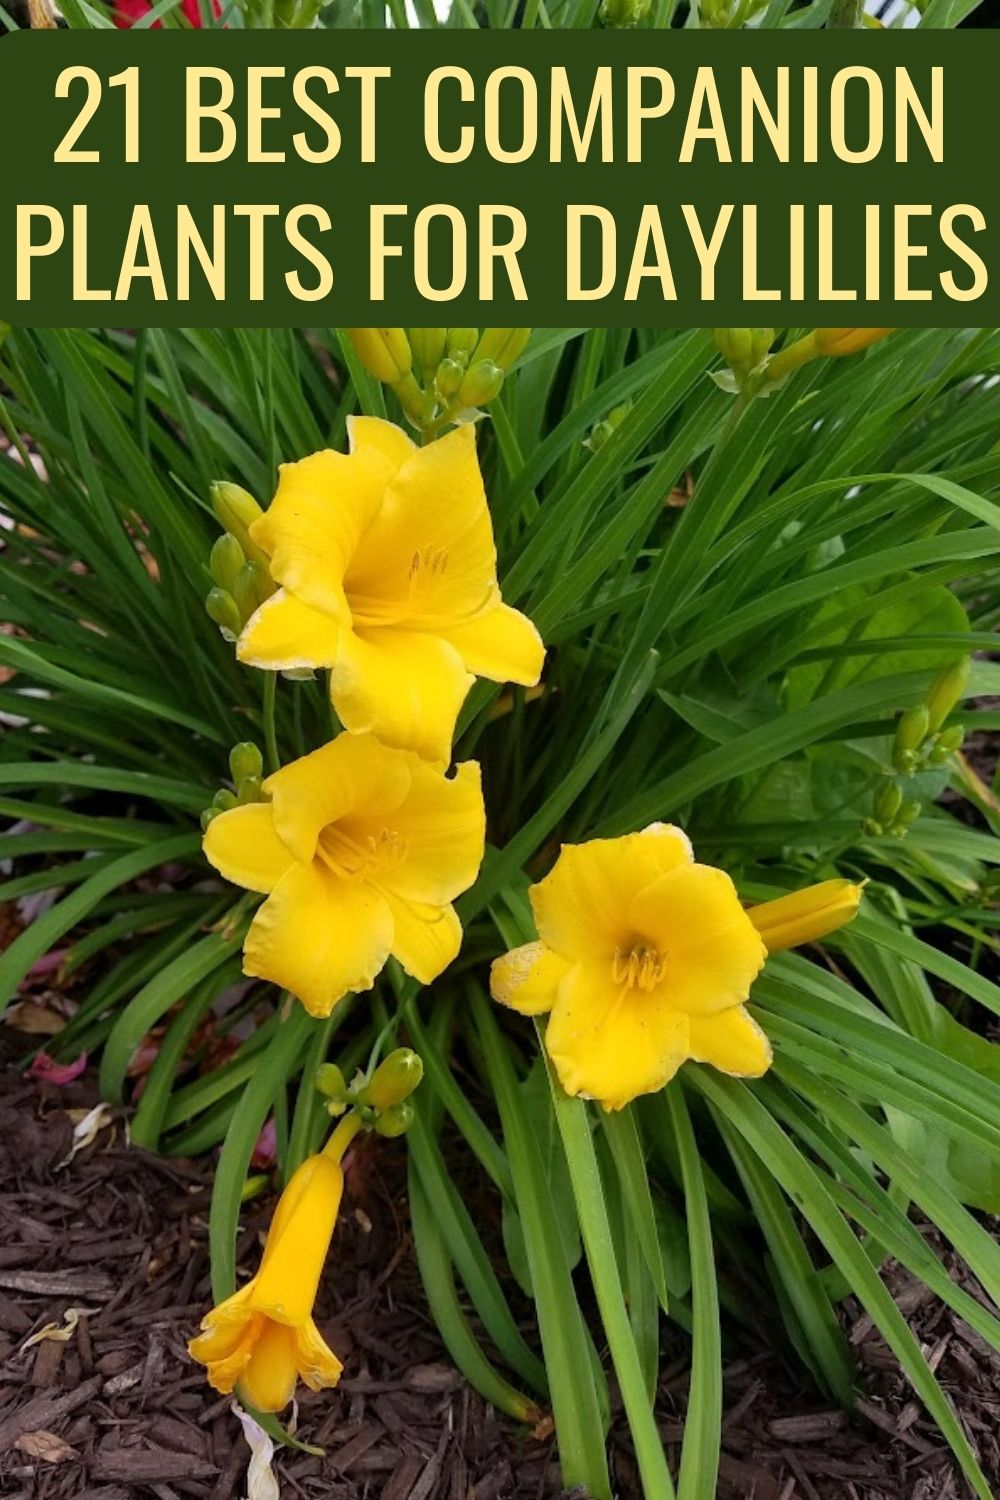 21 best companion plants for daylilies.